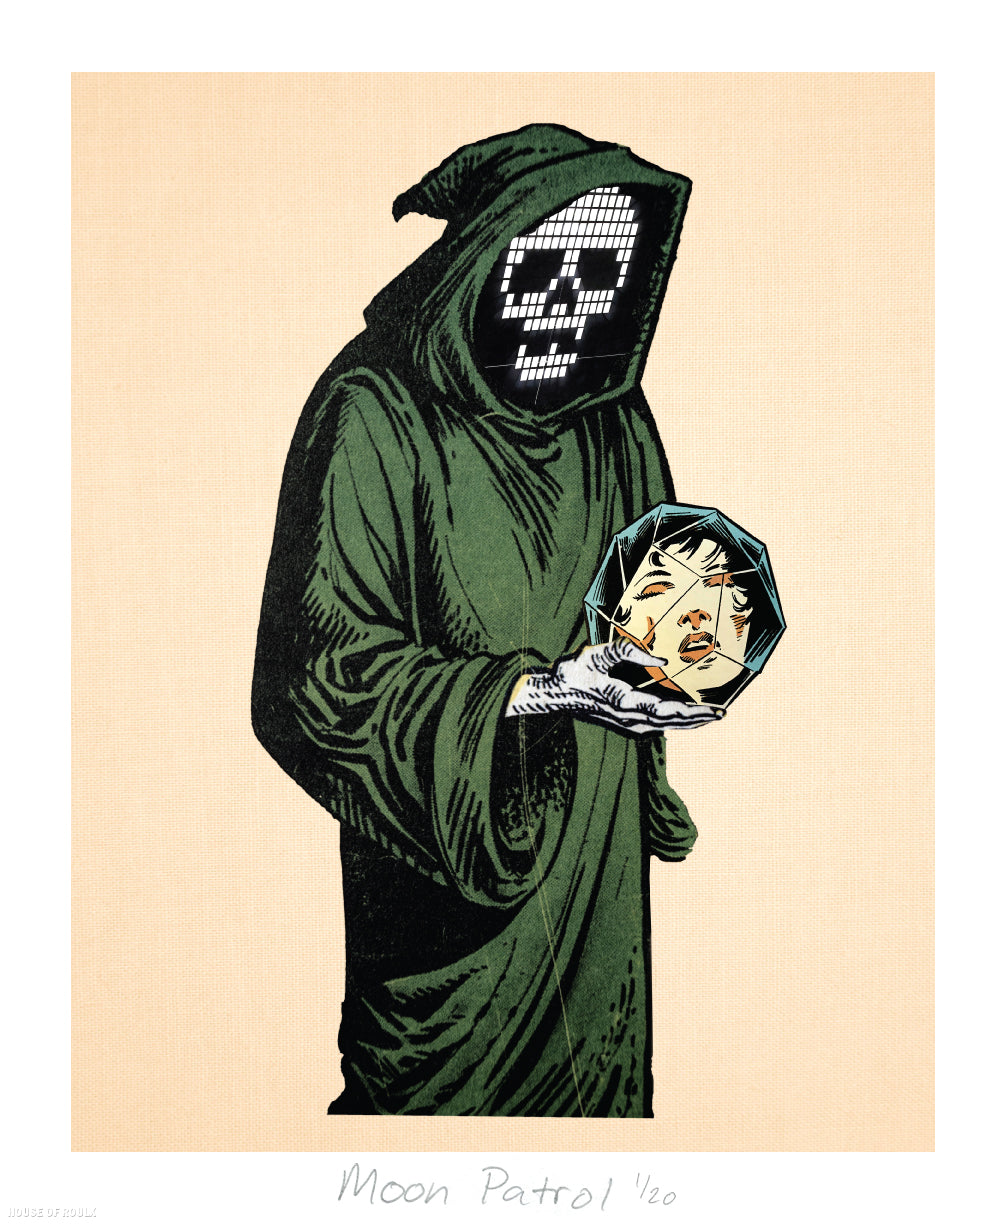 Moon Patrol &quot;Green Wizard&quot; - Limited Edition, Archival Print - 14 x 17&quot;